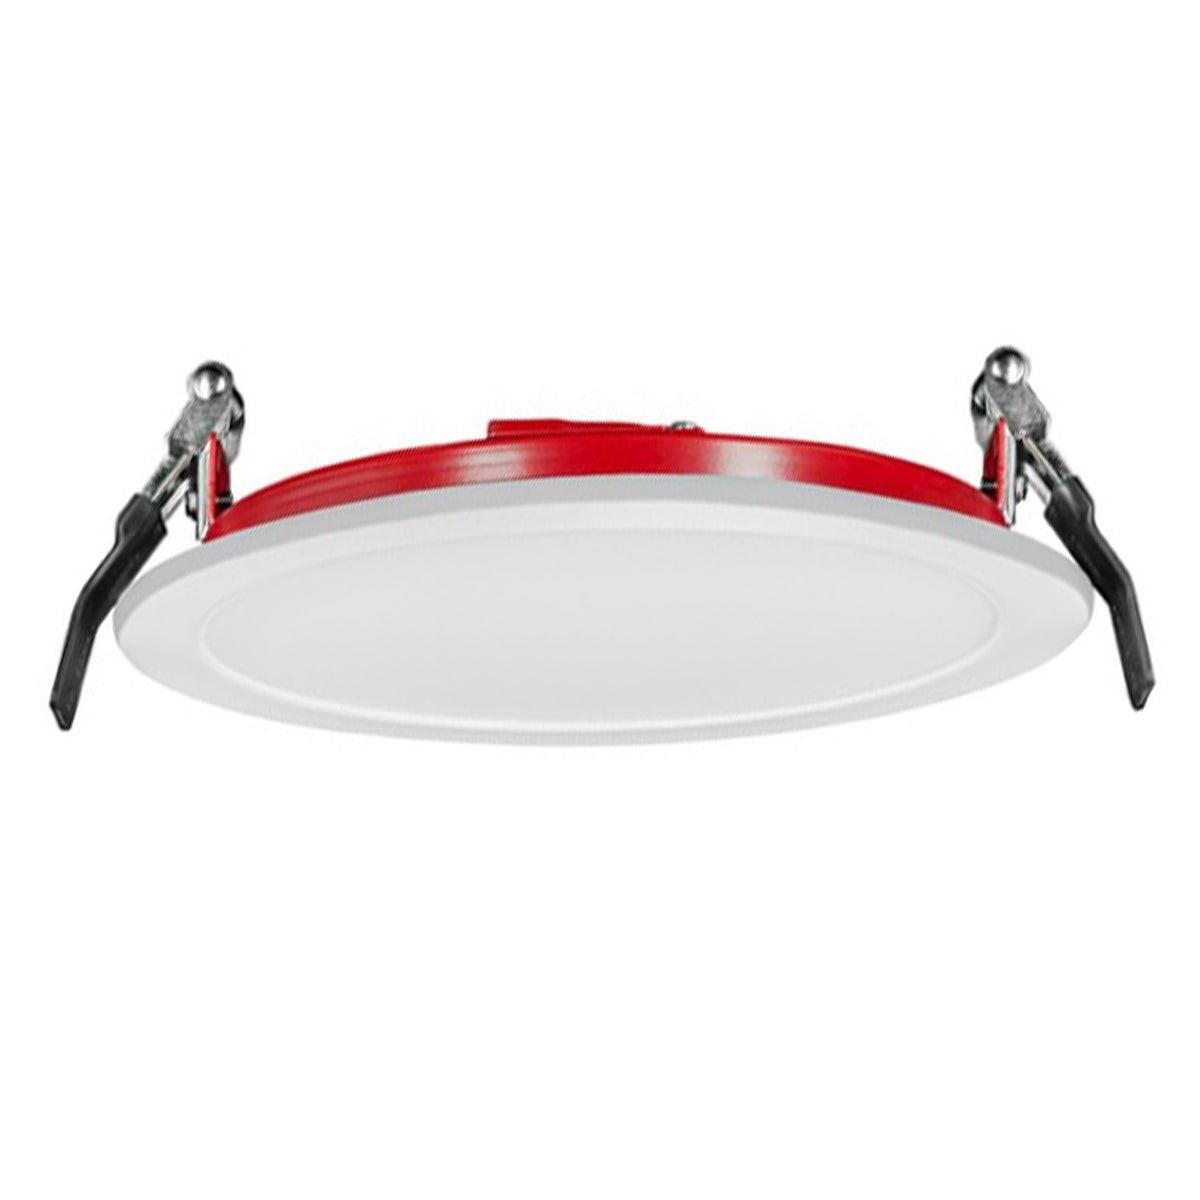 8 inch Flame Resistant Slim Microdisk LED Canless Recessed Light, 19 Watt, 1600 Lumens, Selectable CCT, 2700K to 5000K, 120V